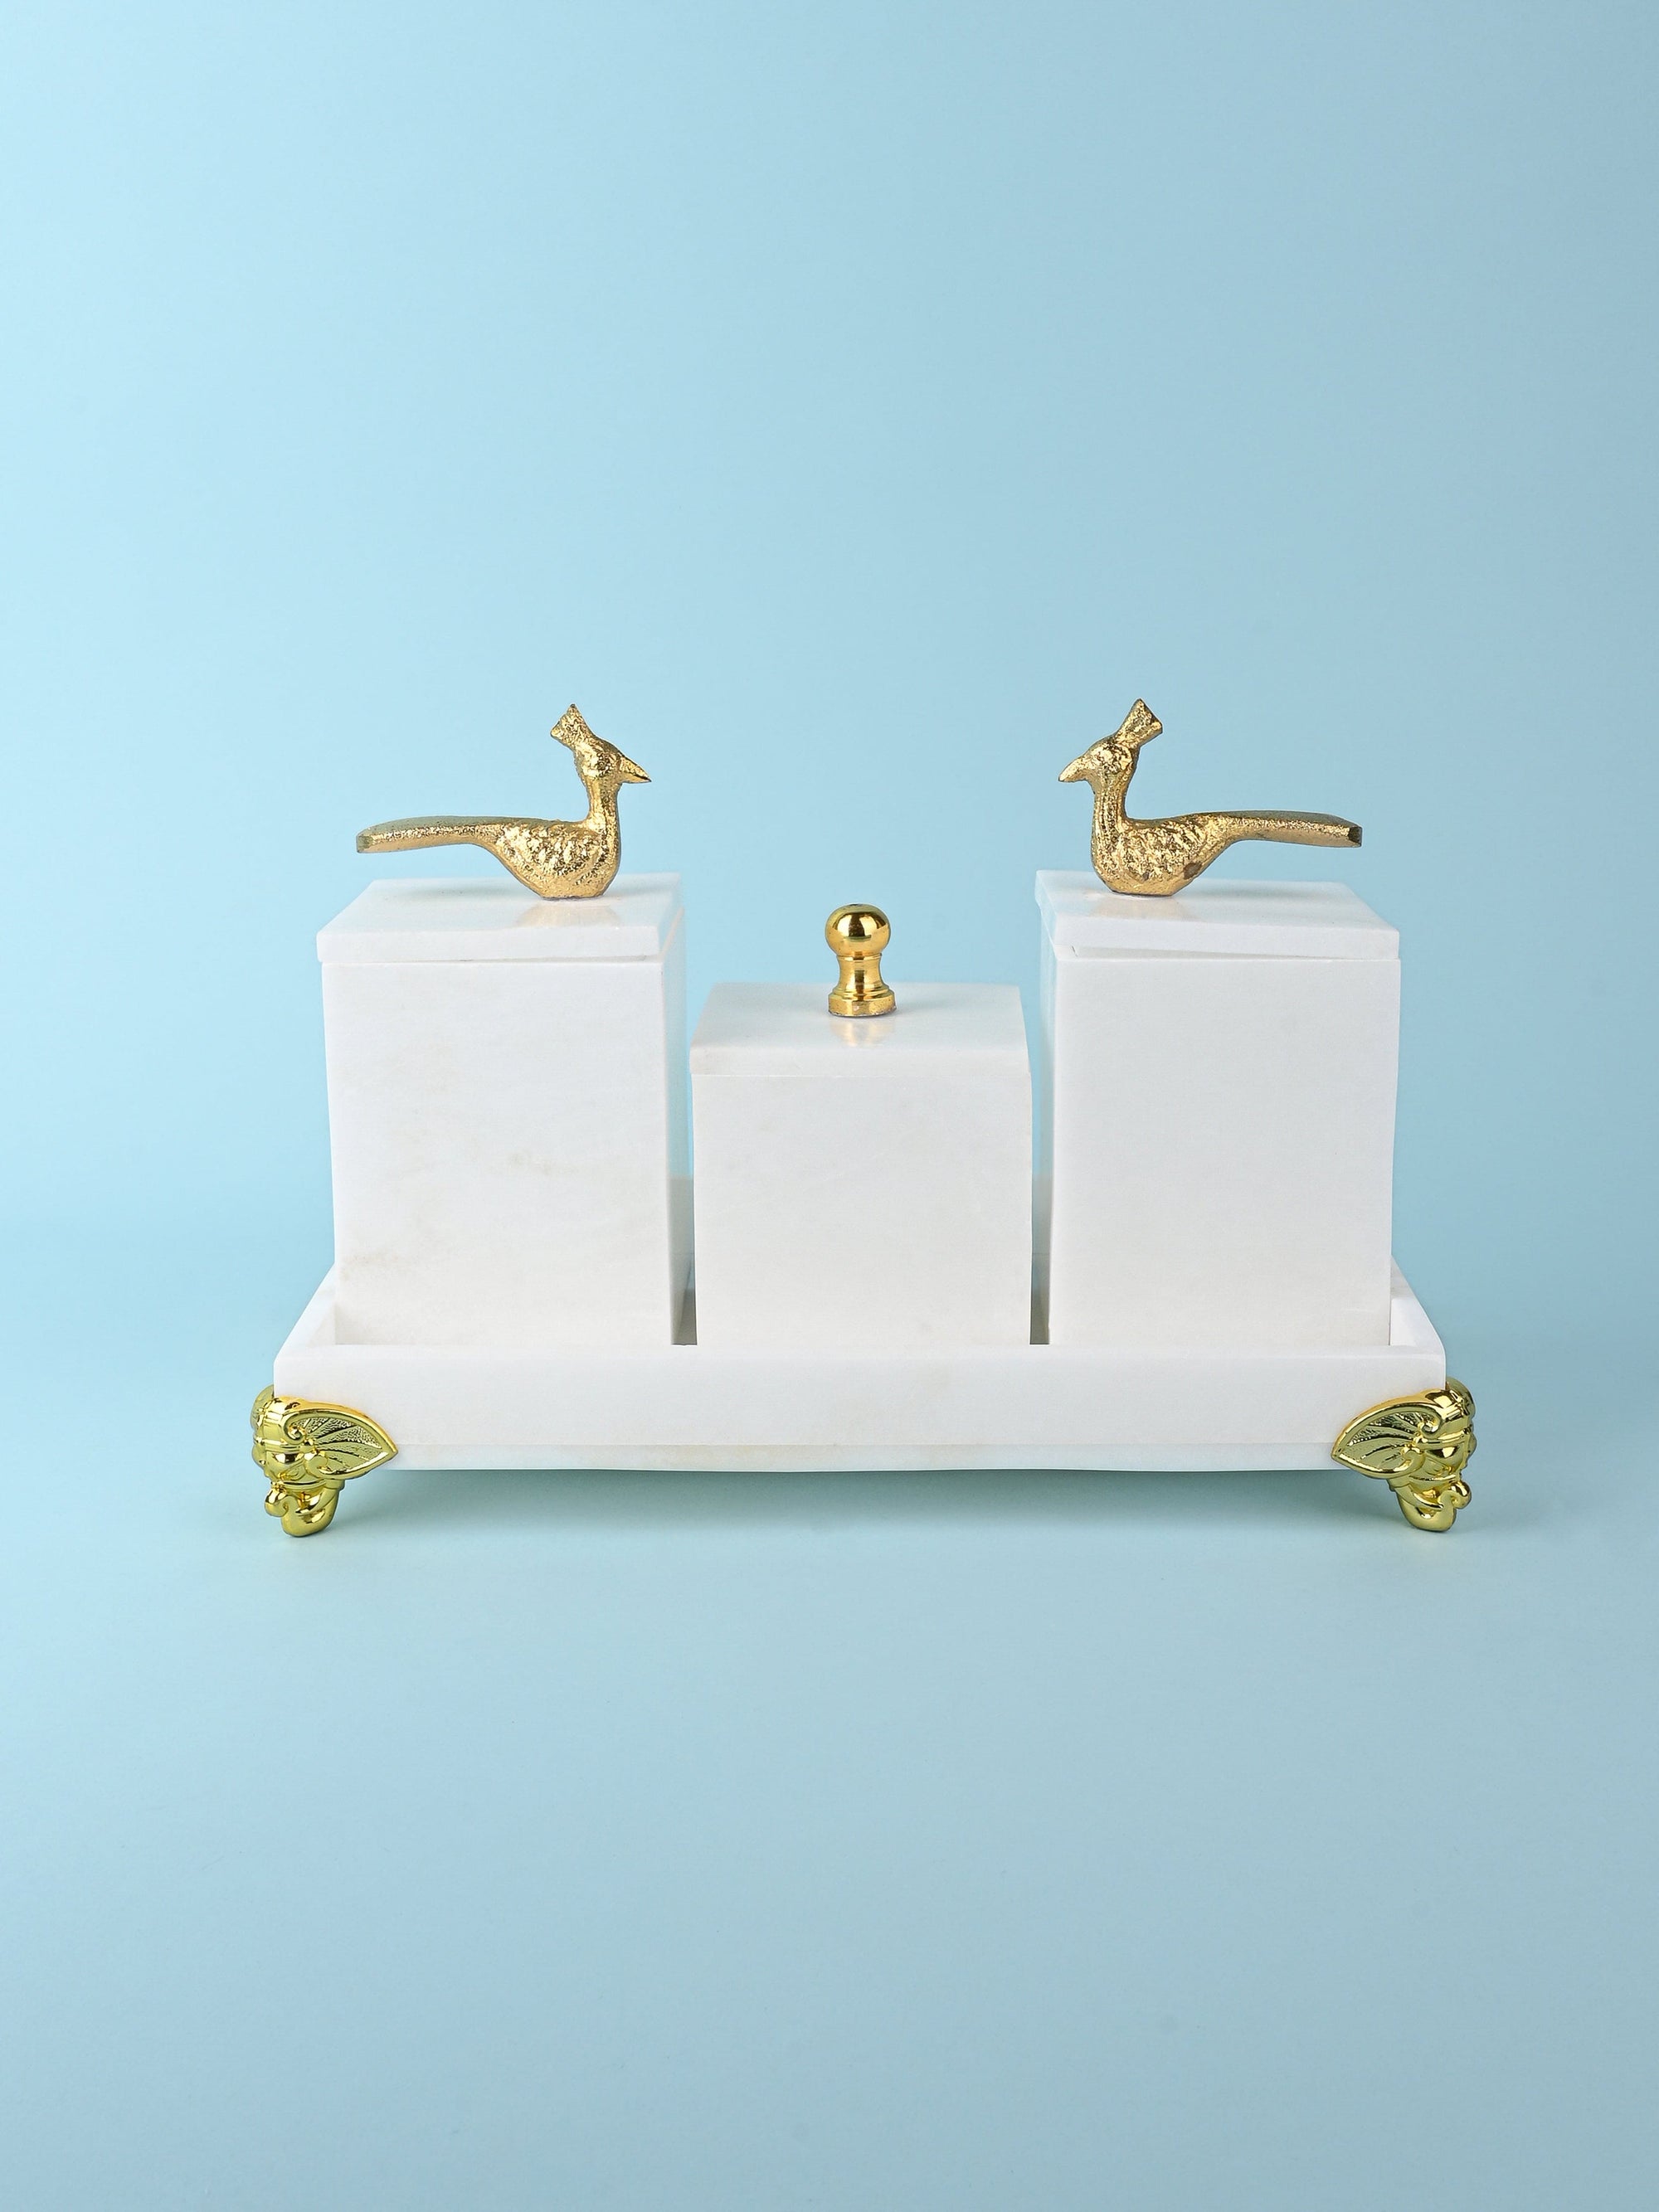 White Marble Set of 3 Containers on a Rectangular Tray with Golden Legs